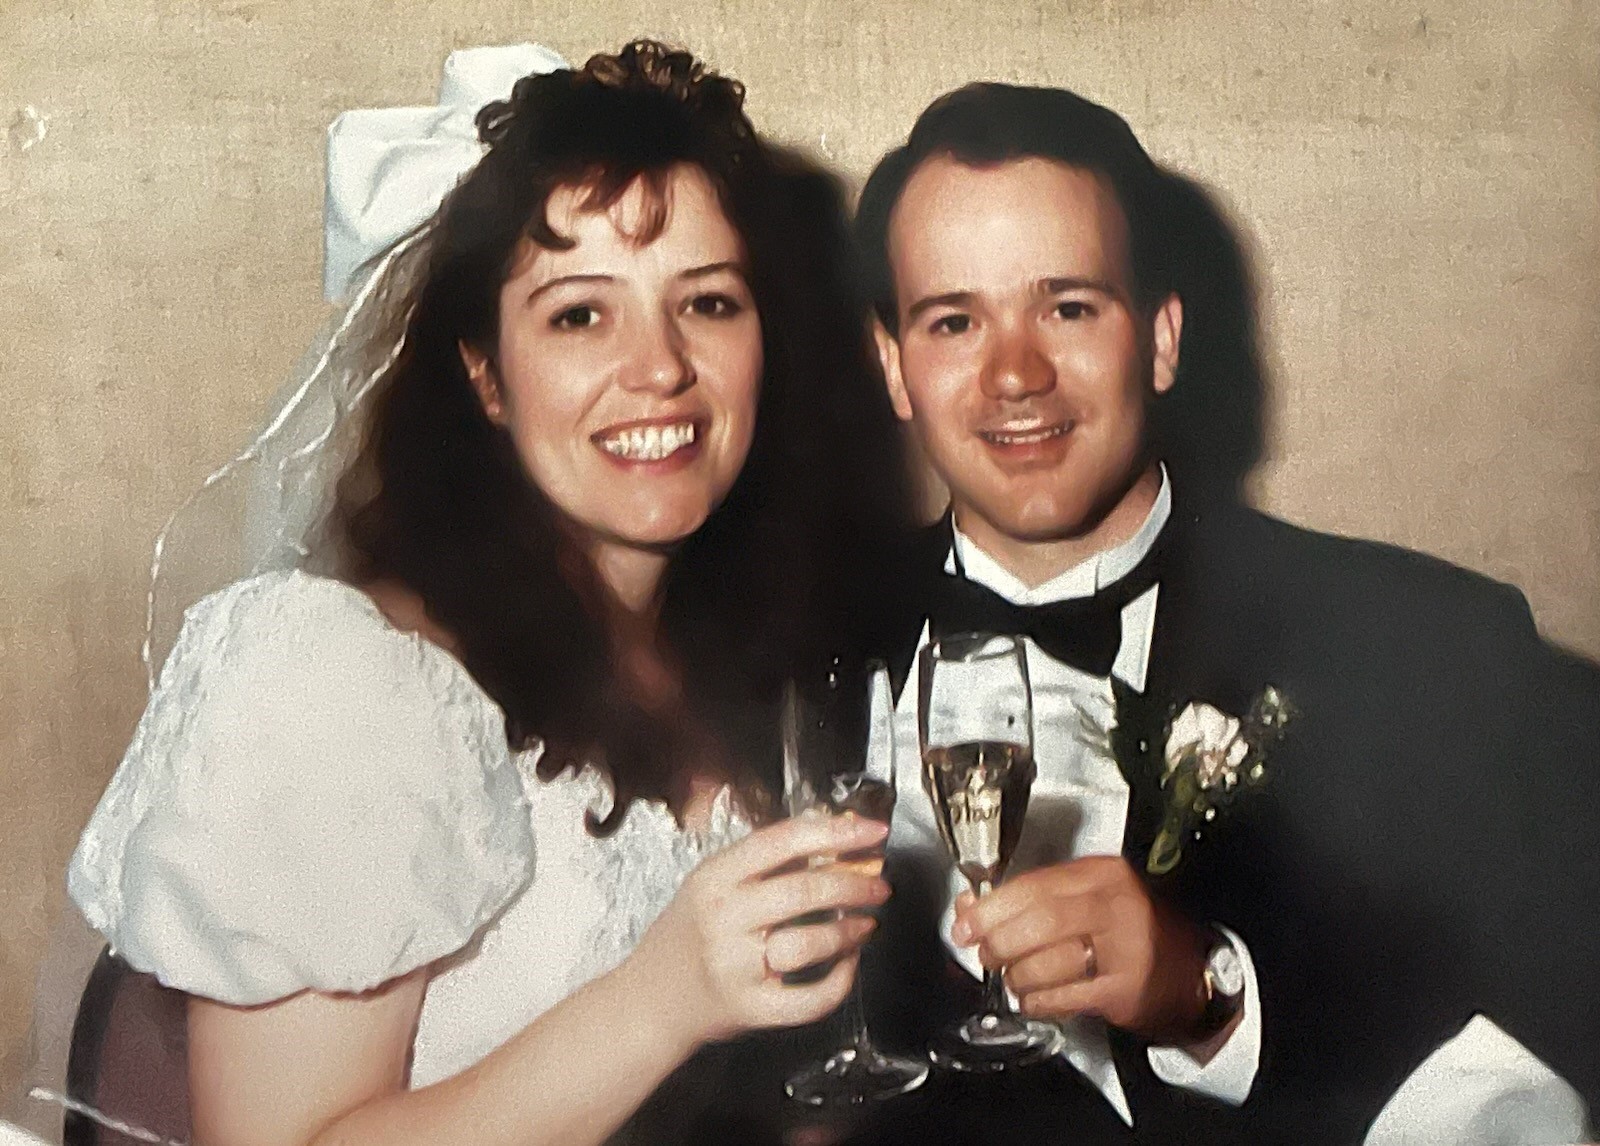 Tom and Lisa on their wedding day. They are toasting with glasses of champagne.